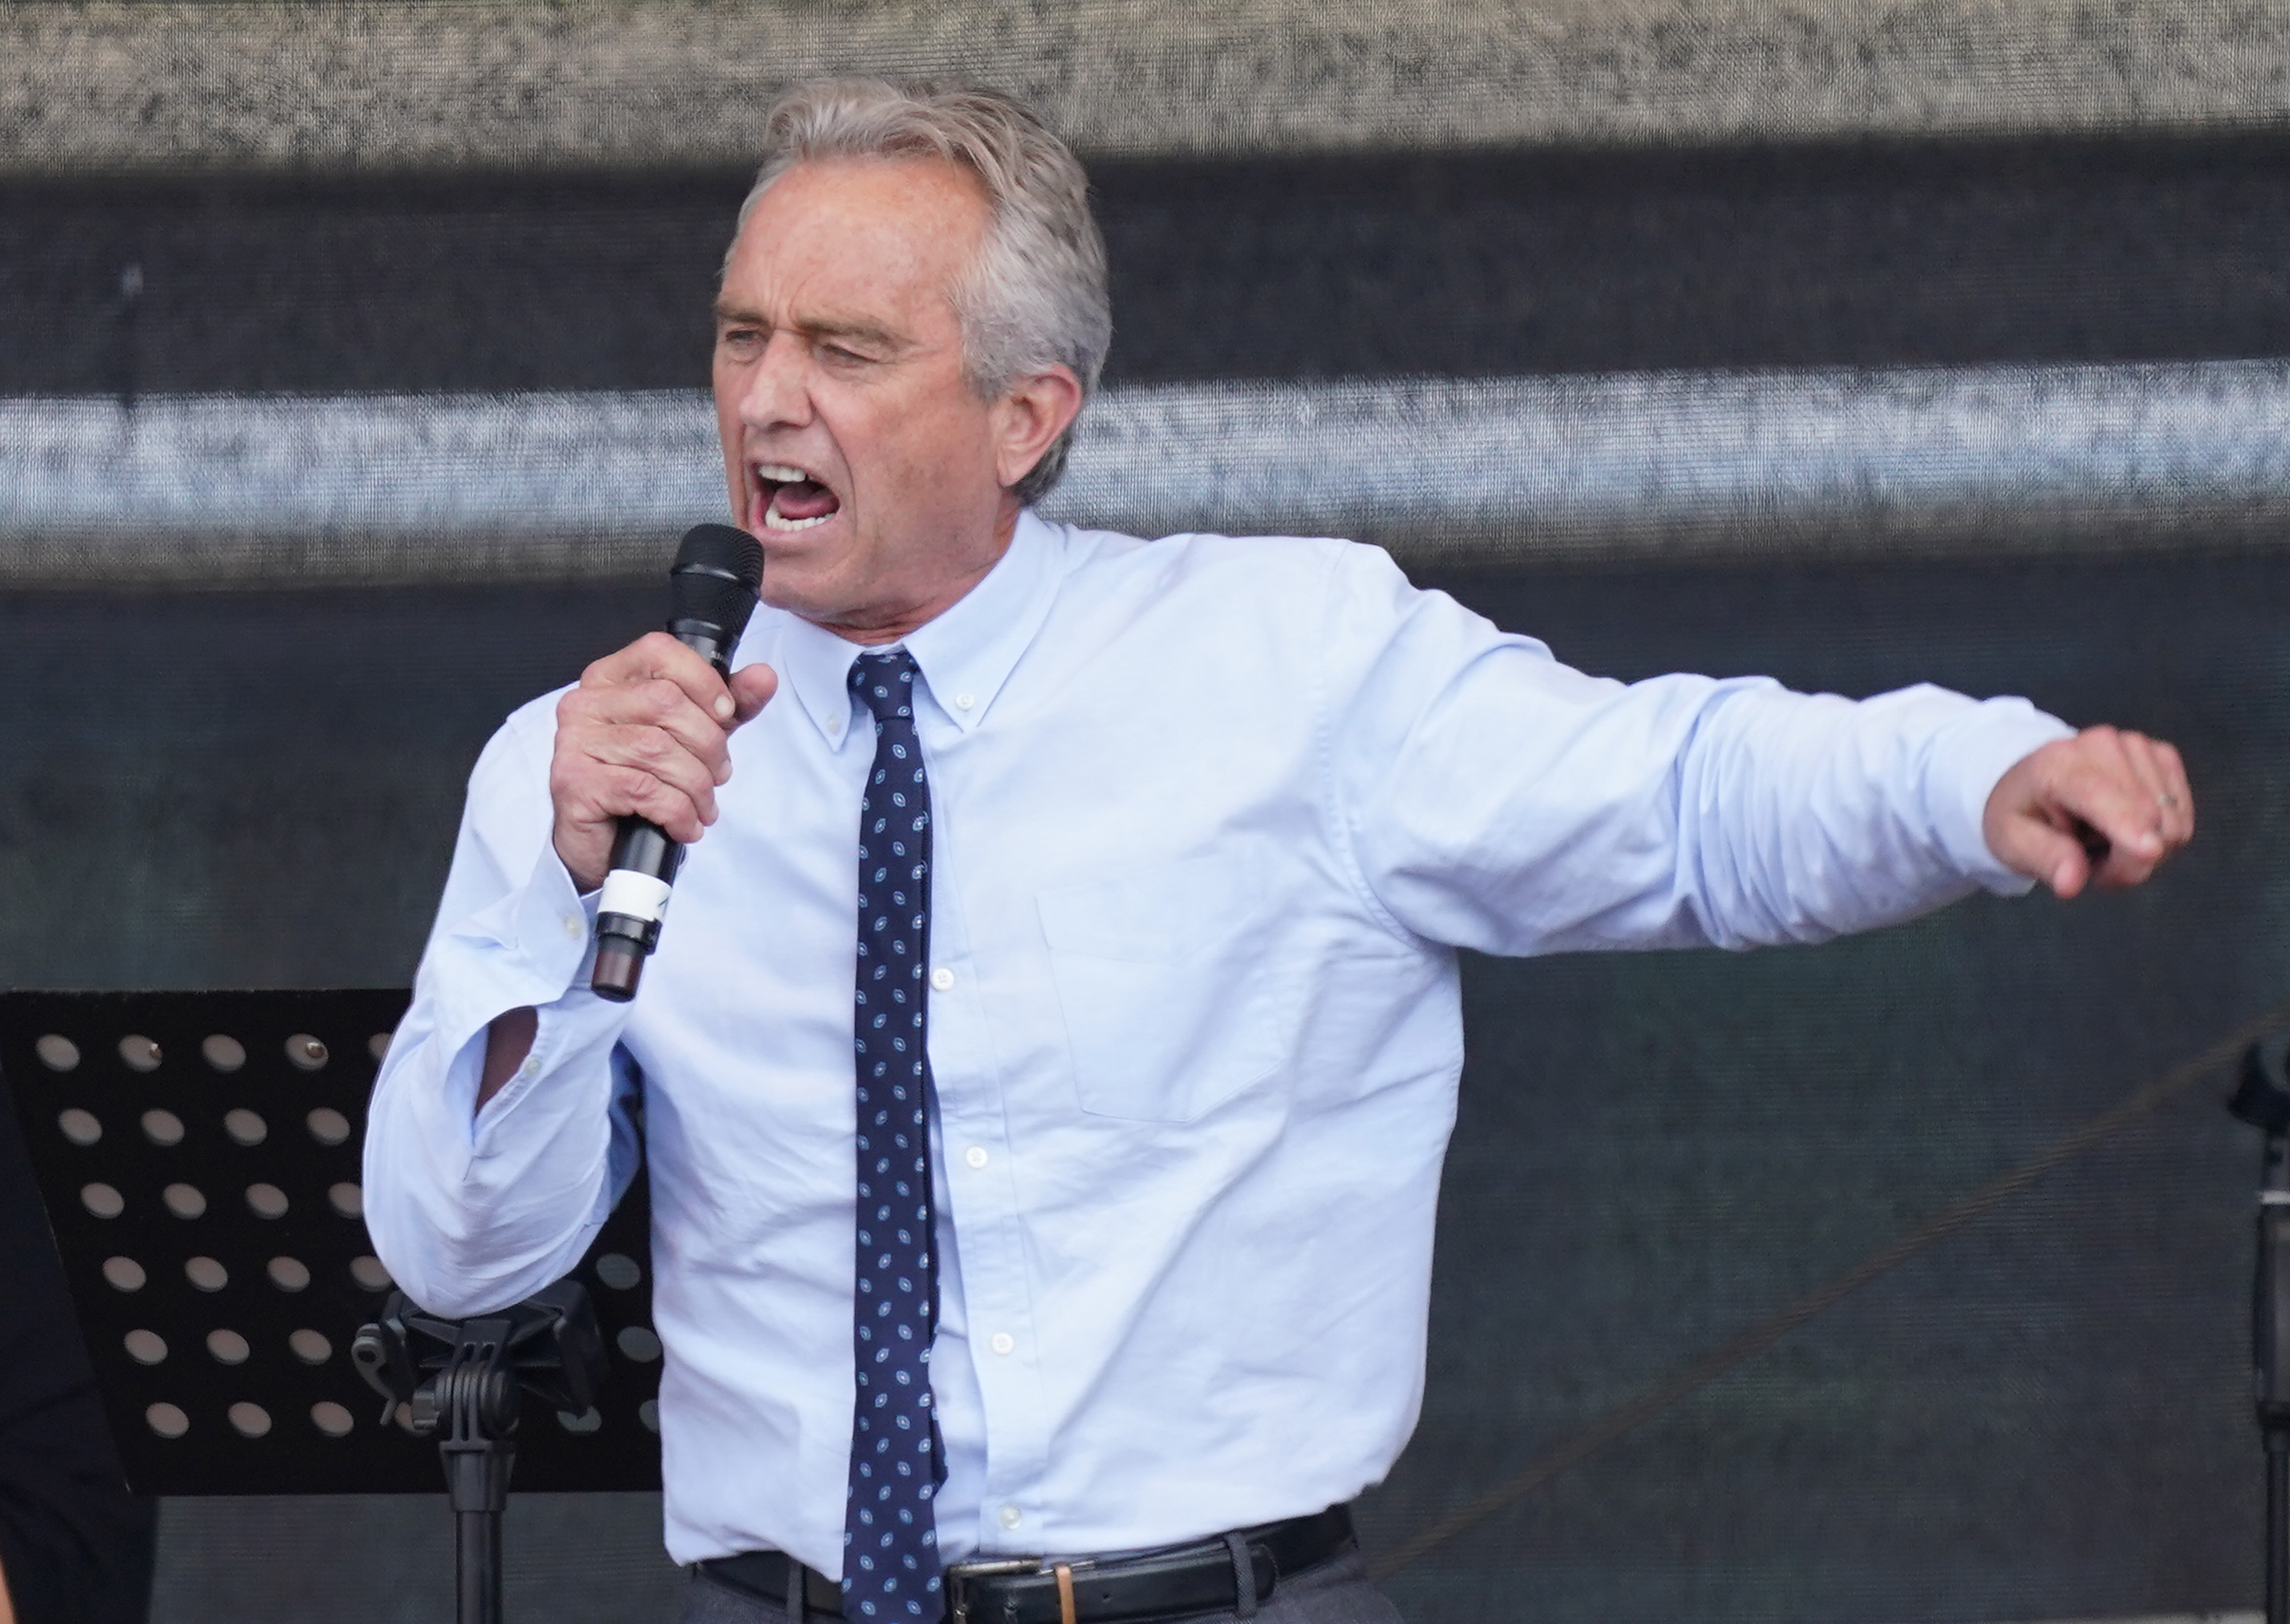 Kennedy, in a white shirt and slim blue tie, speaks emphatically into a handheld microphone, his other arm extended in a gesture.